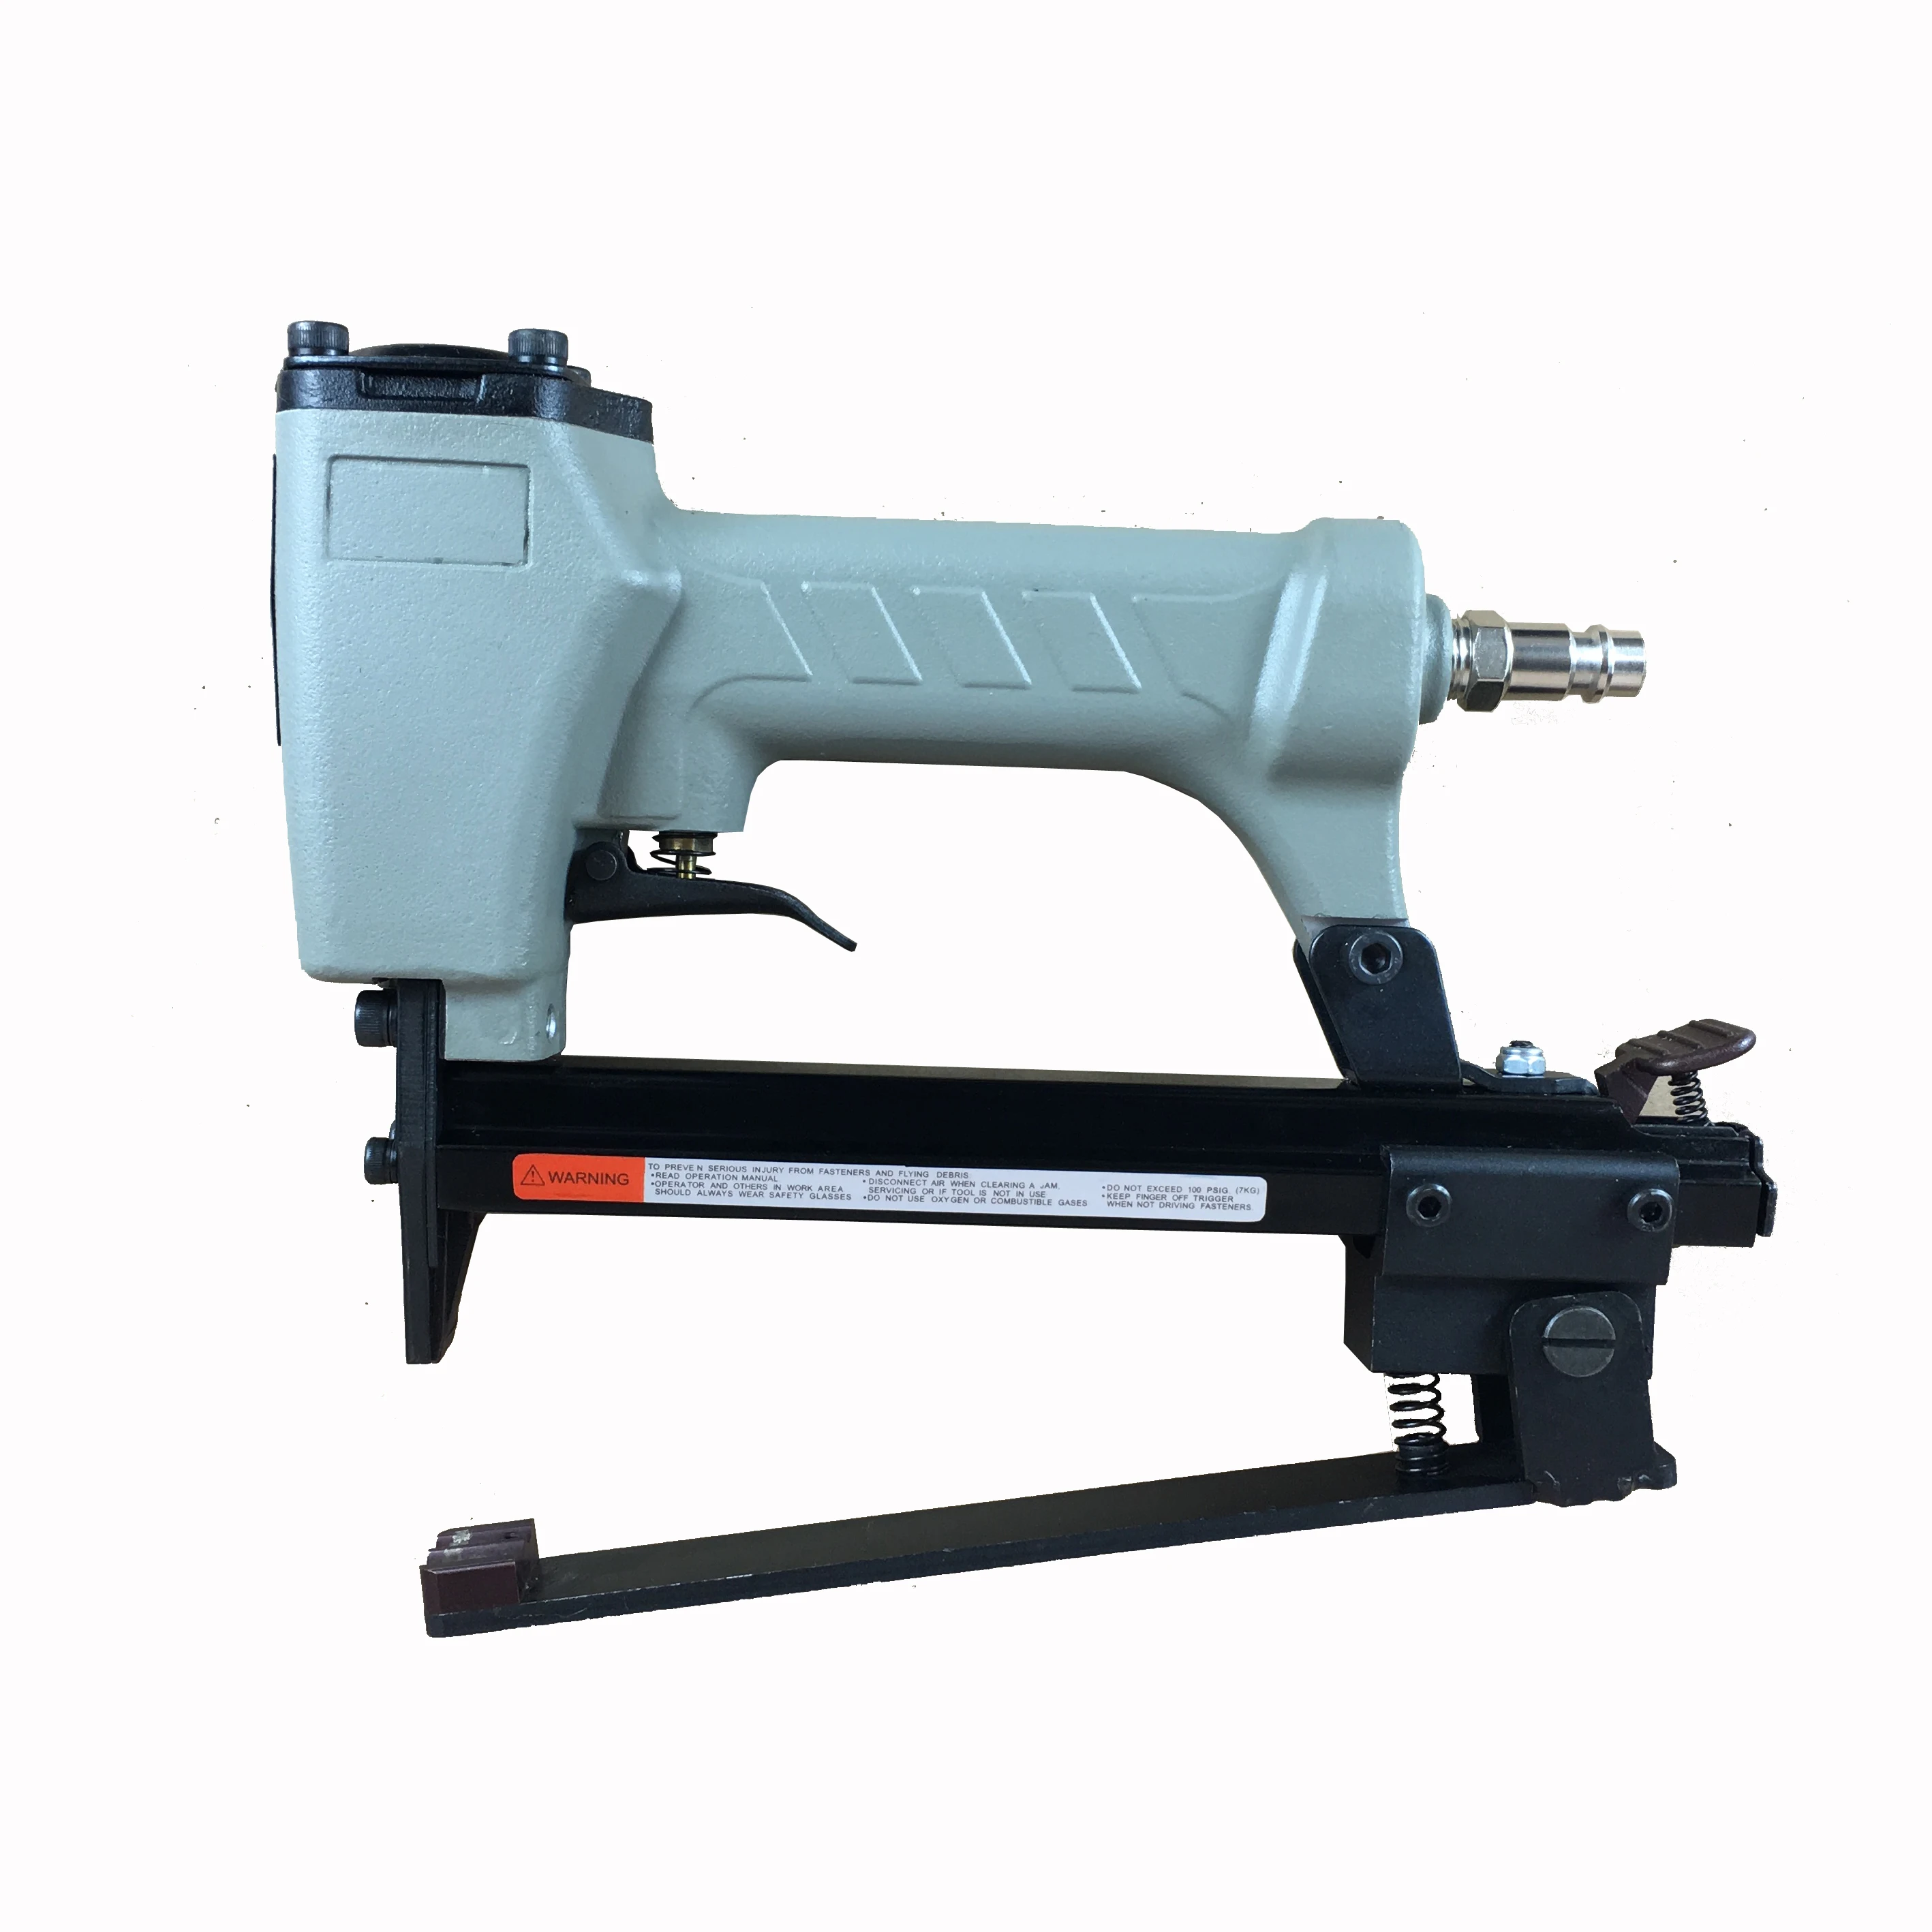 

Side Carton Stapler, Pneumatic Side/Tray Staplers for small box